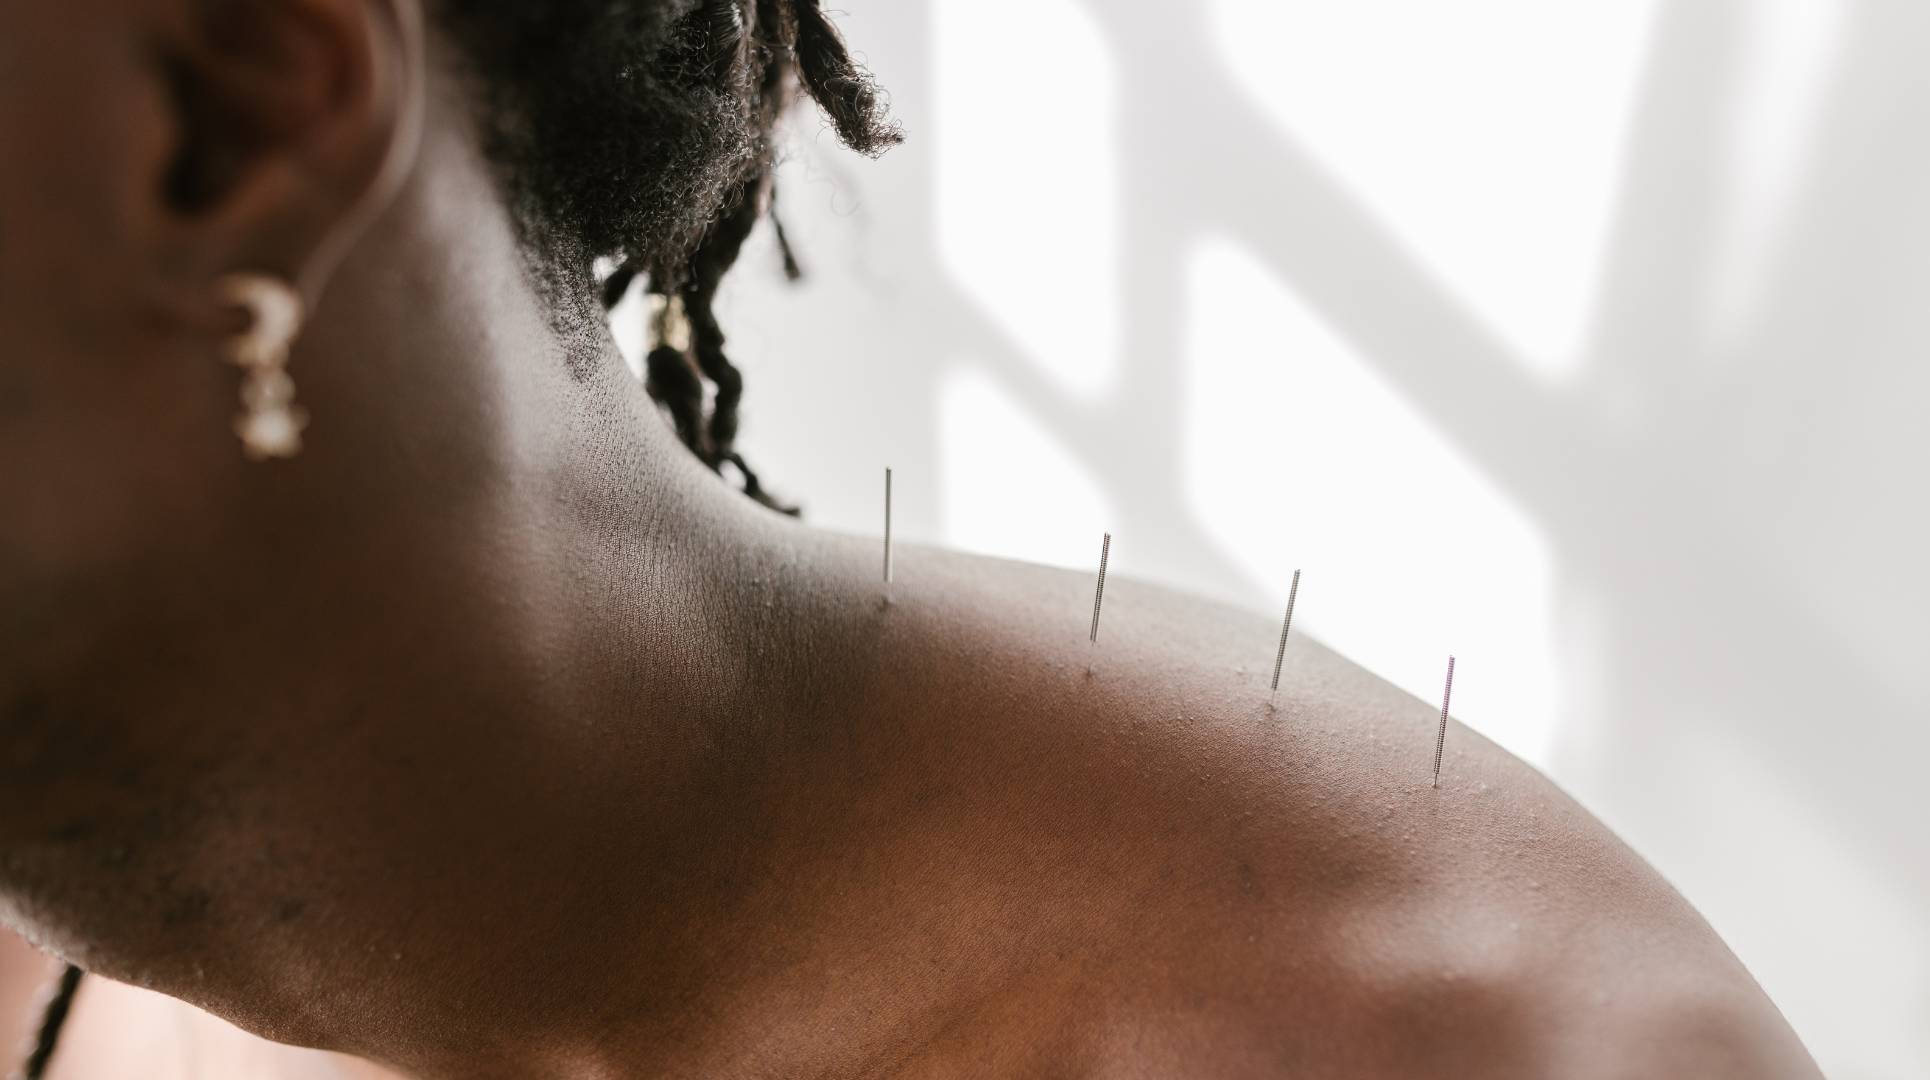 Say Goodbye to Pain: How Acupuncture Can Help You With Pain Management